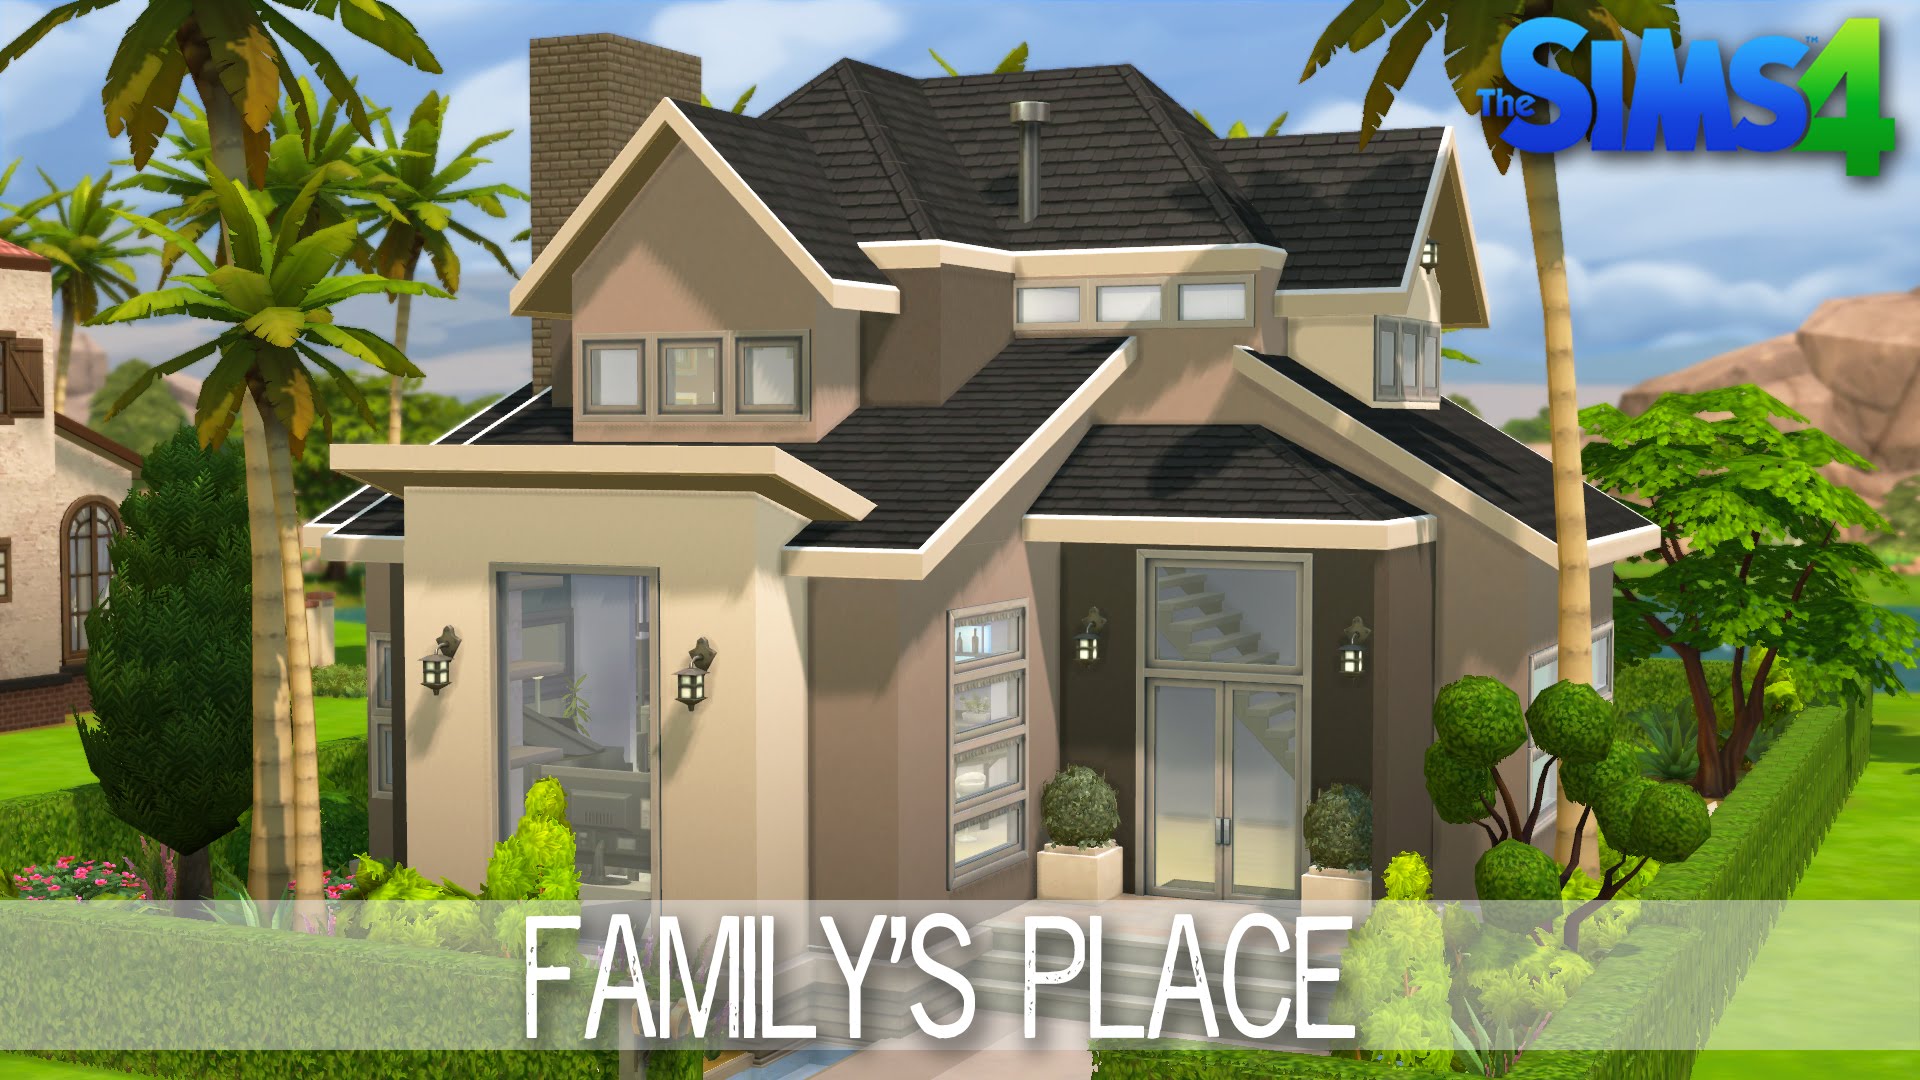 The Sims 4 House building - Family's Place - Speed Build - YouTube